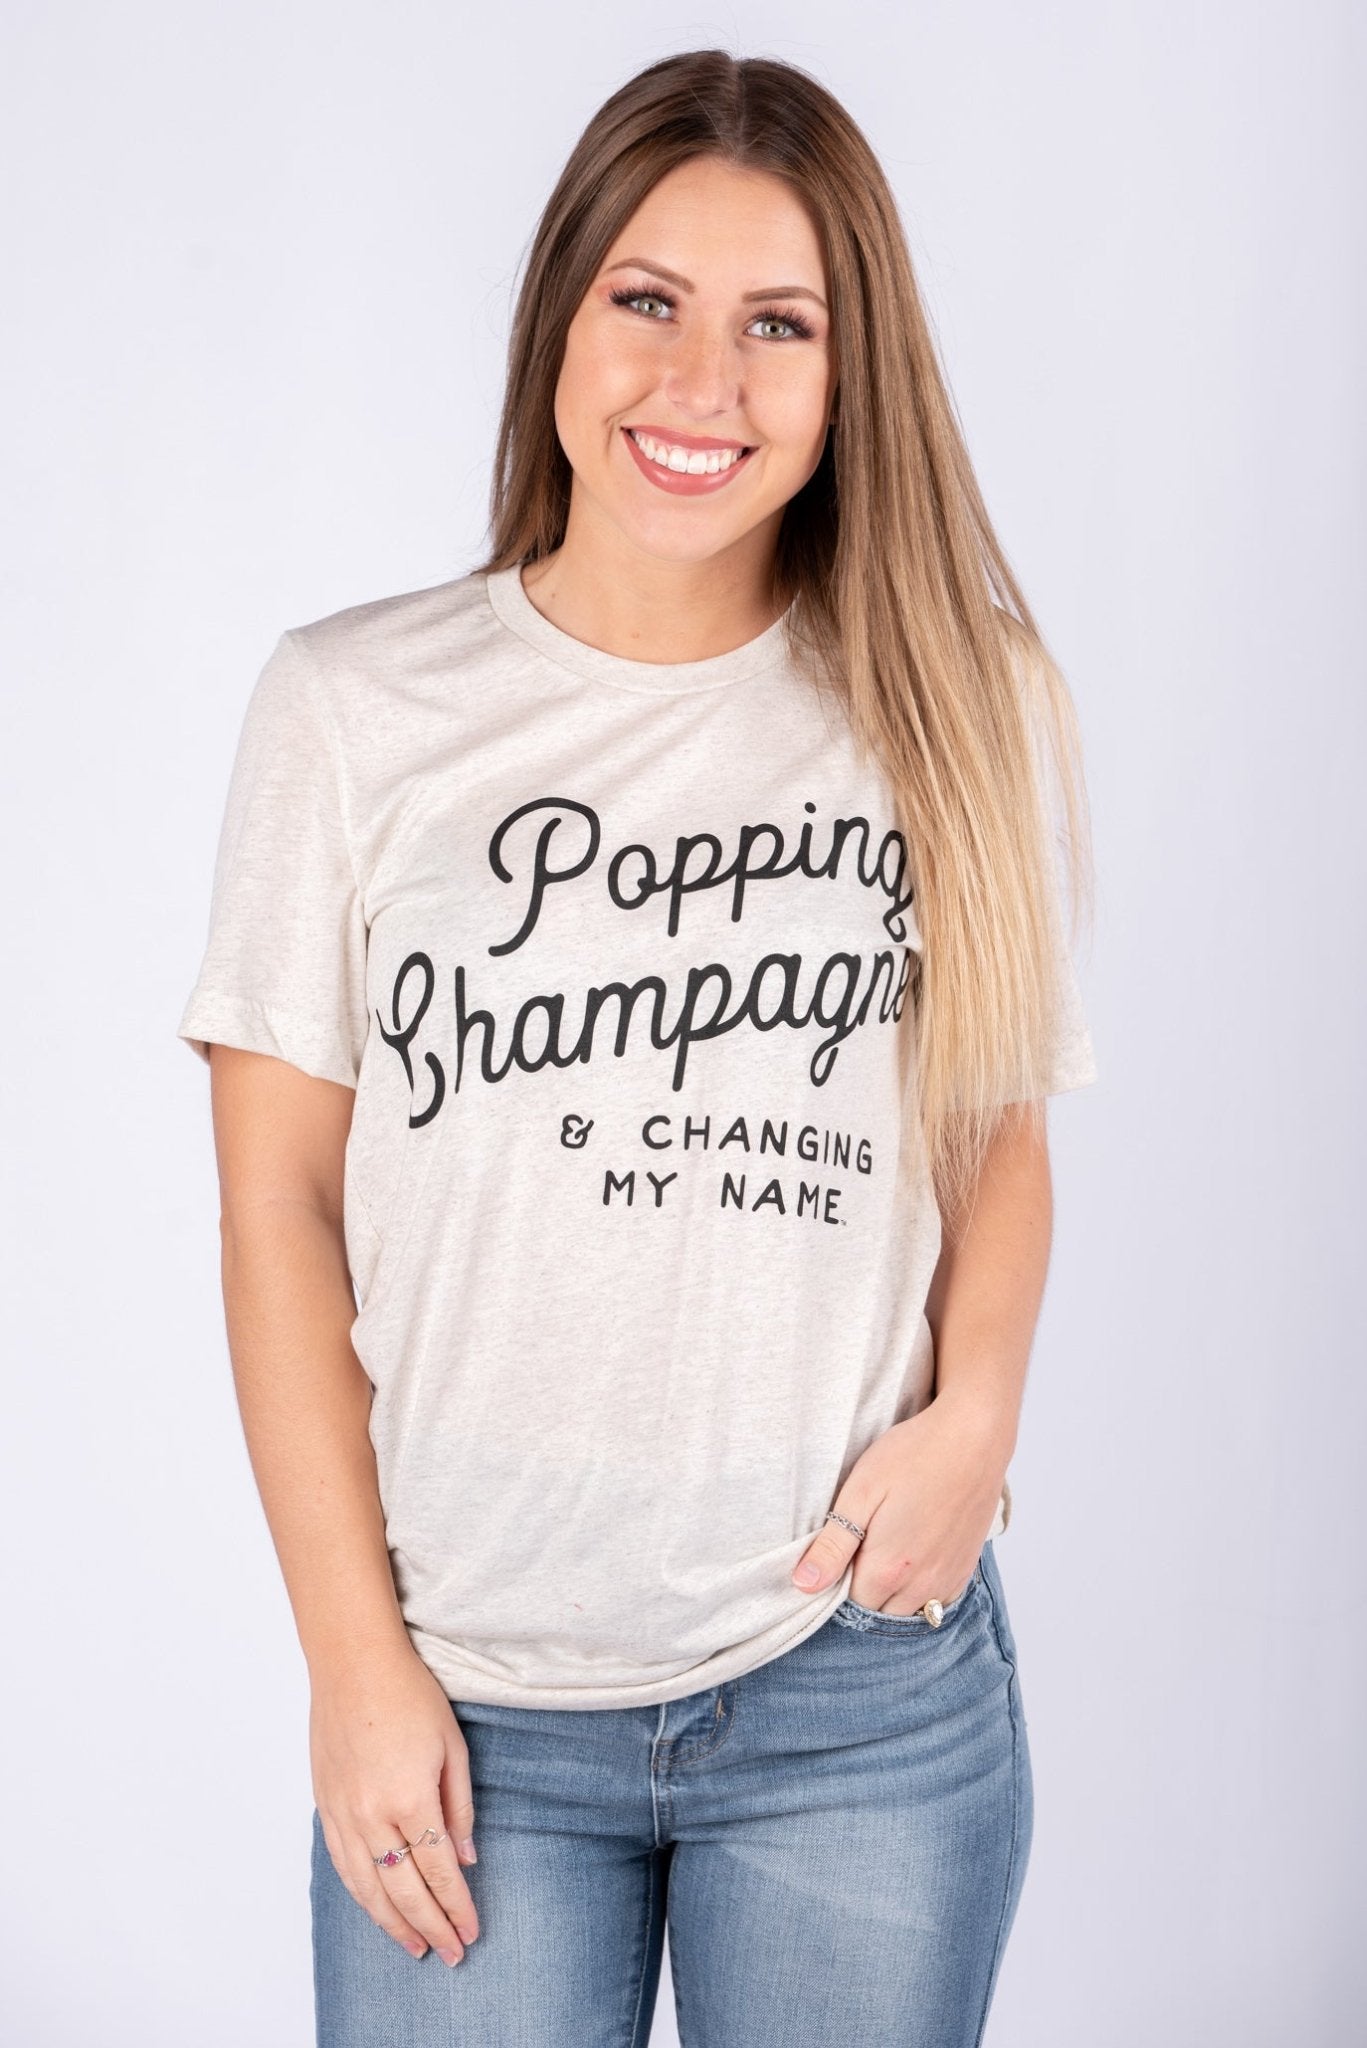 Popping champagne unisex short sleeve t-shirt oatmeal - Stylish T-shirts - Trendy Graphic T-Shirts and Tank Tops at Lush Fashion Lounge Boutique in Oklahoma City